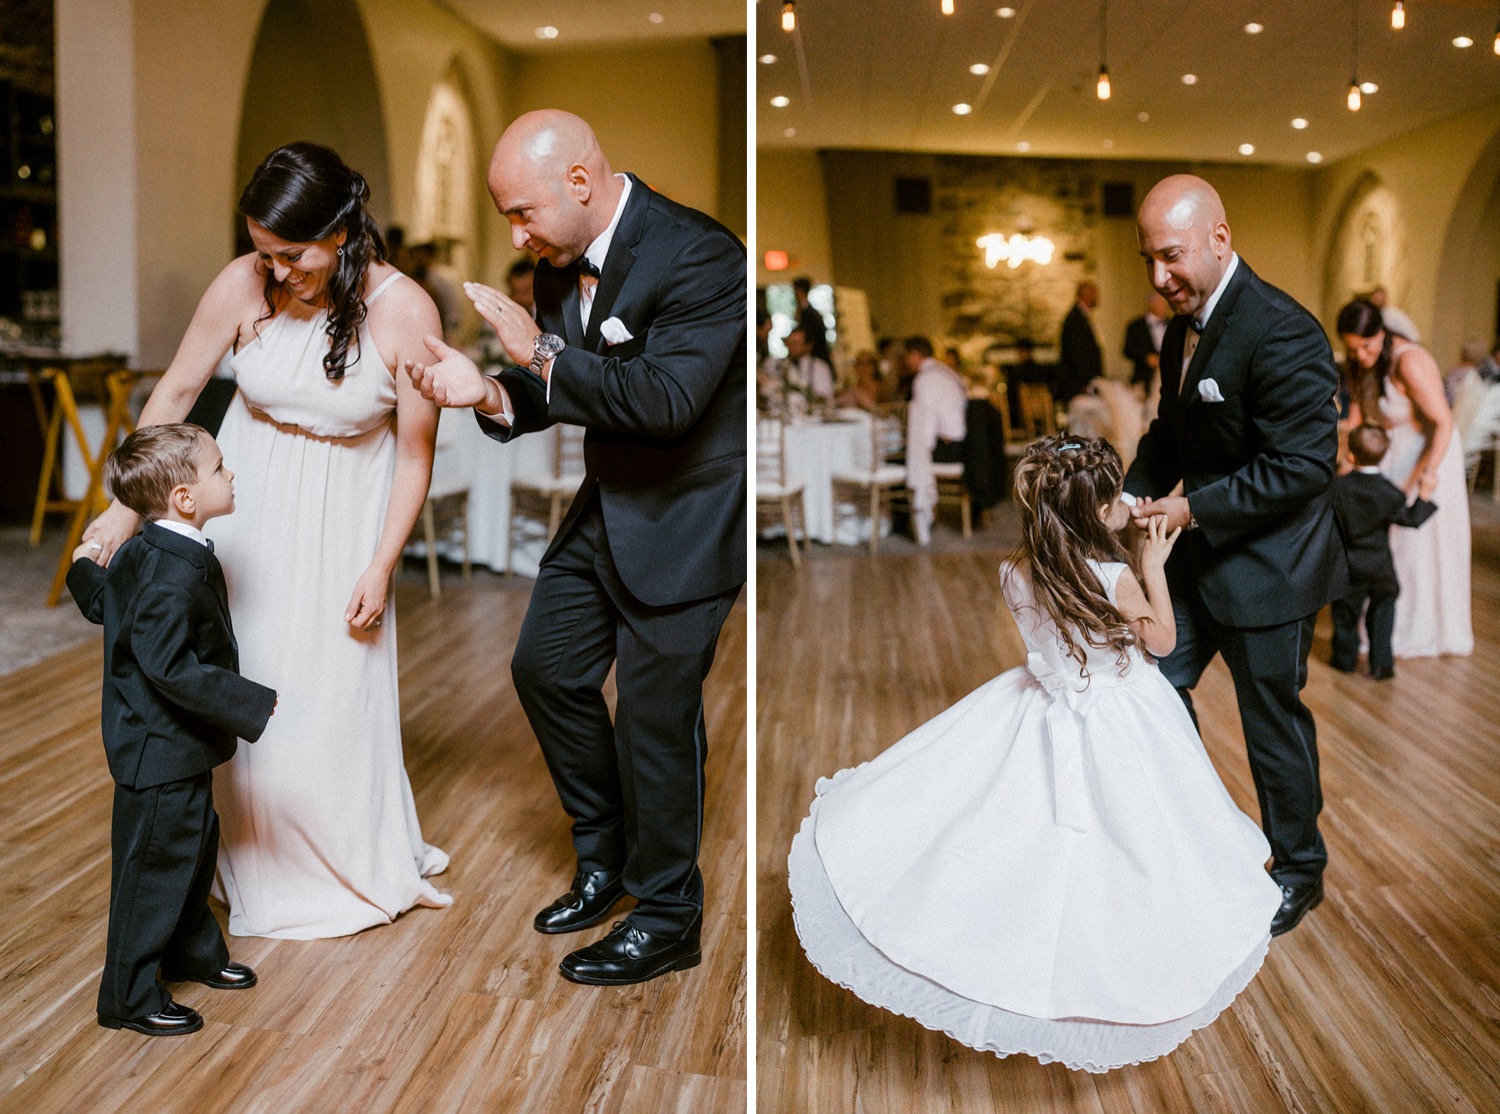 ring bearer and flower girl dancing at wedding reception